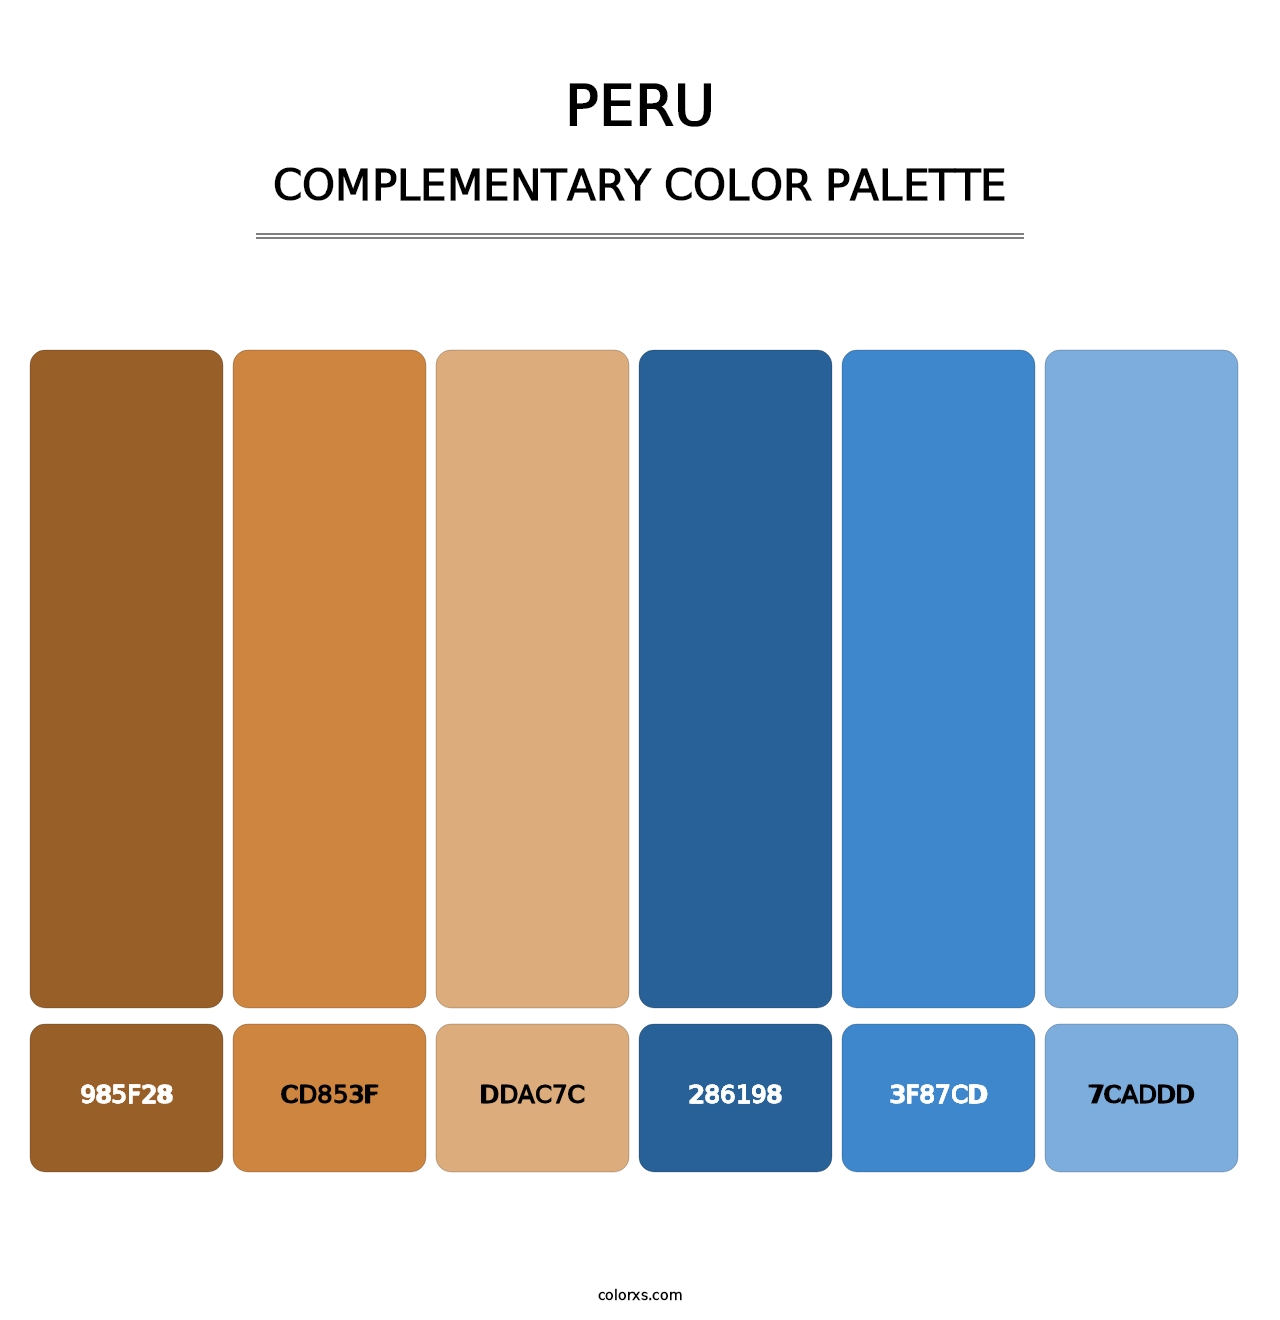 Peru - Complementary Color Palette